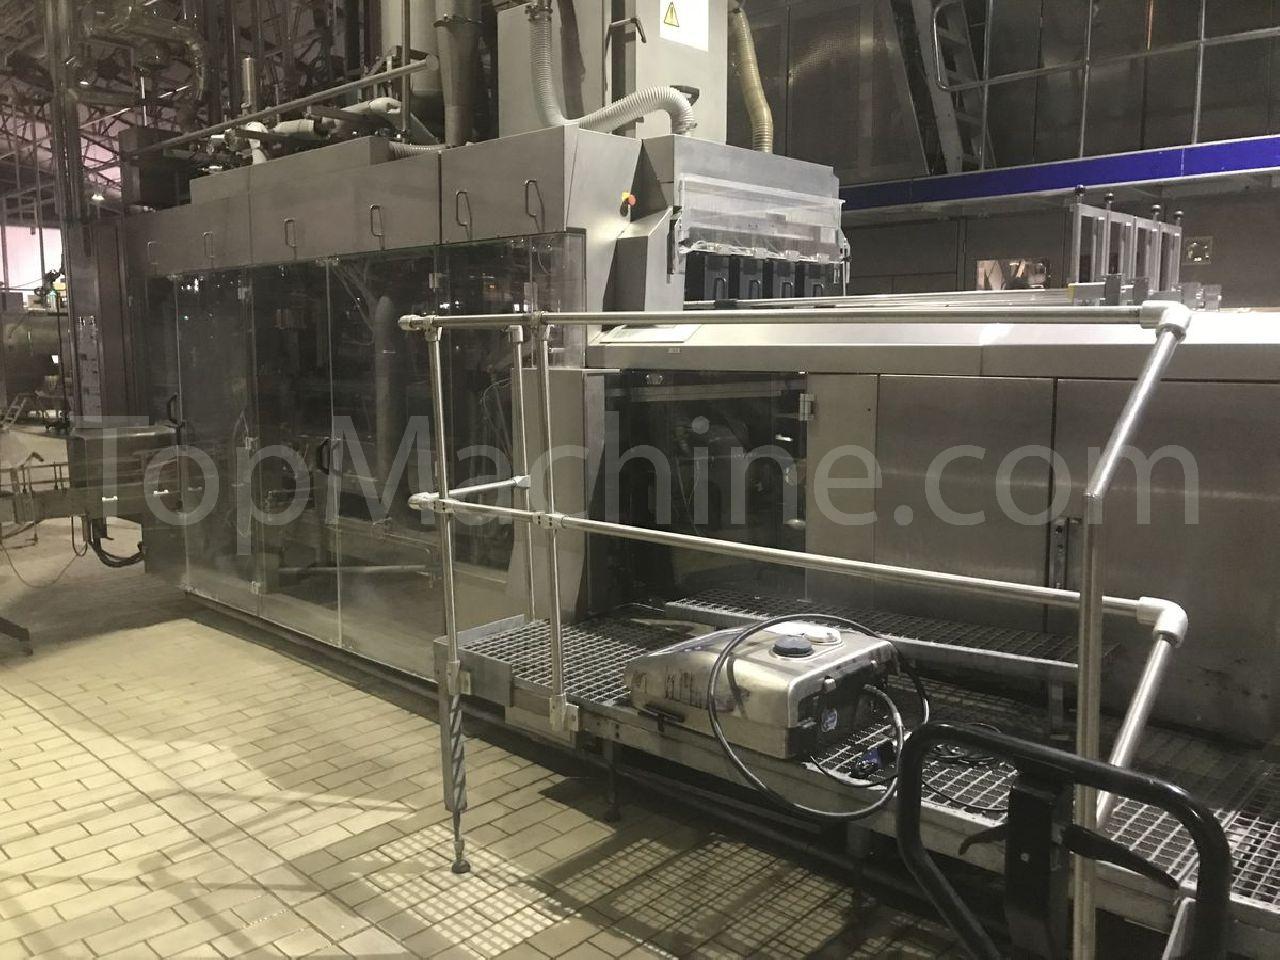 Used SIG Combibloc CFA 310-31 Dairy & Juices Aseptic filling